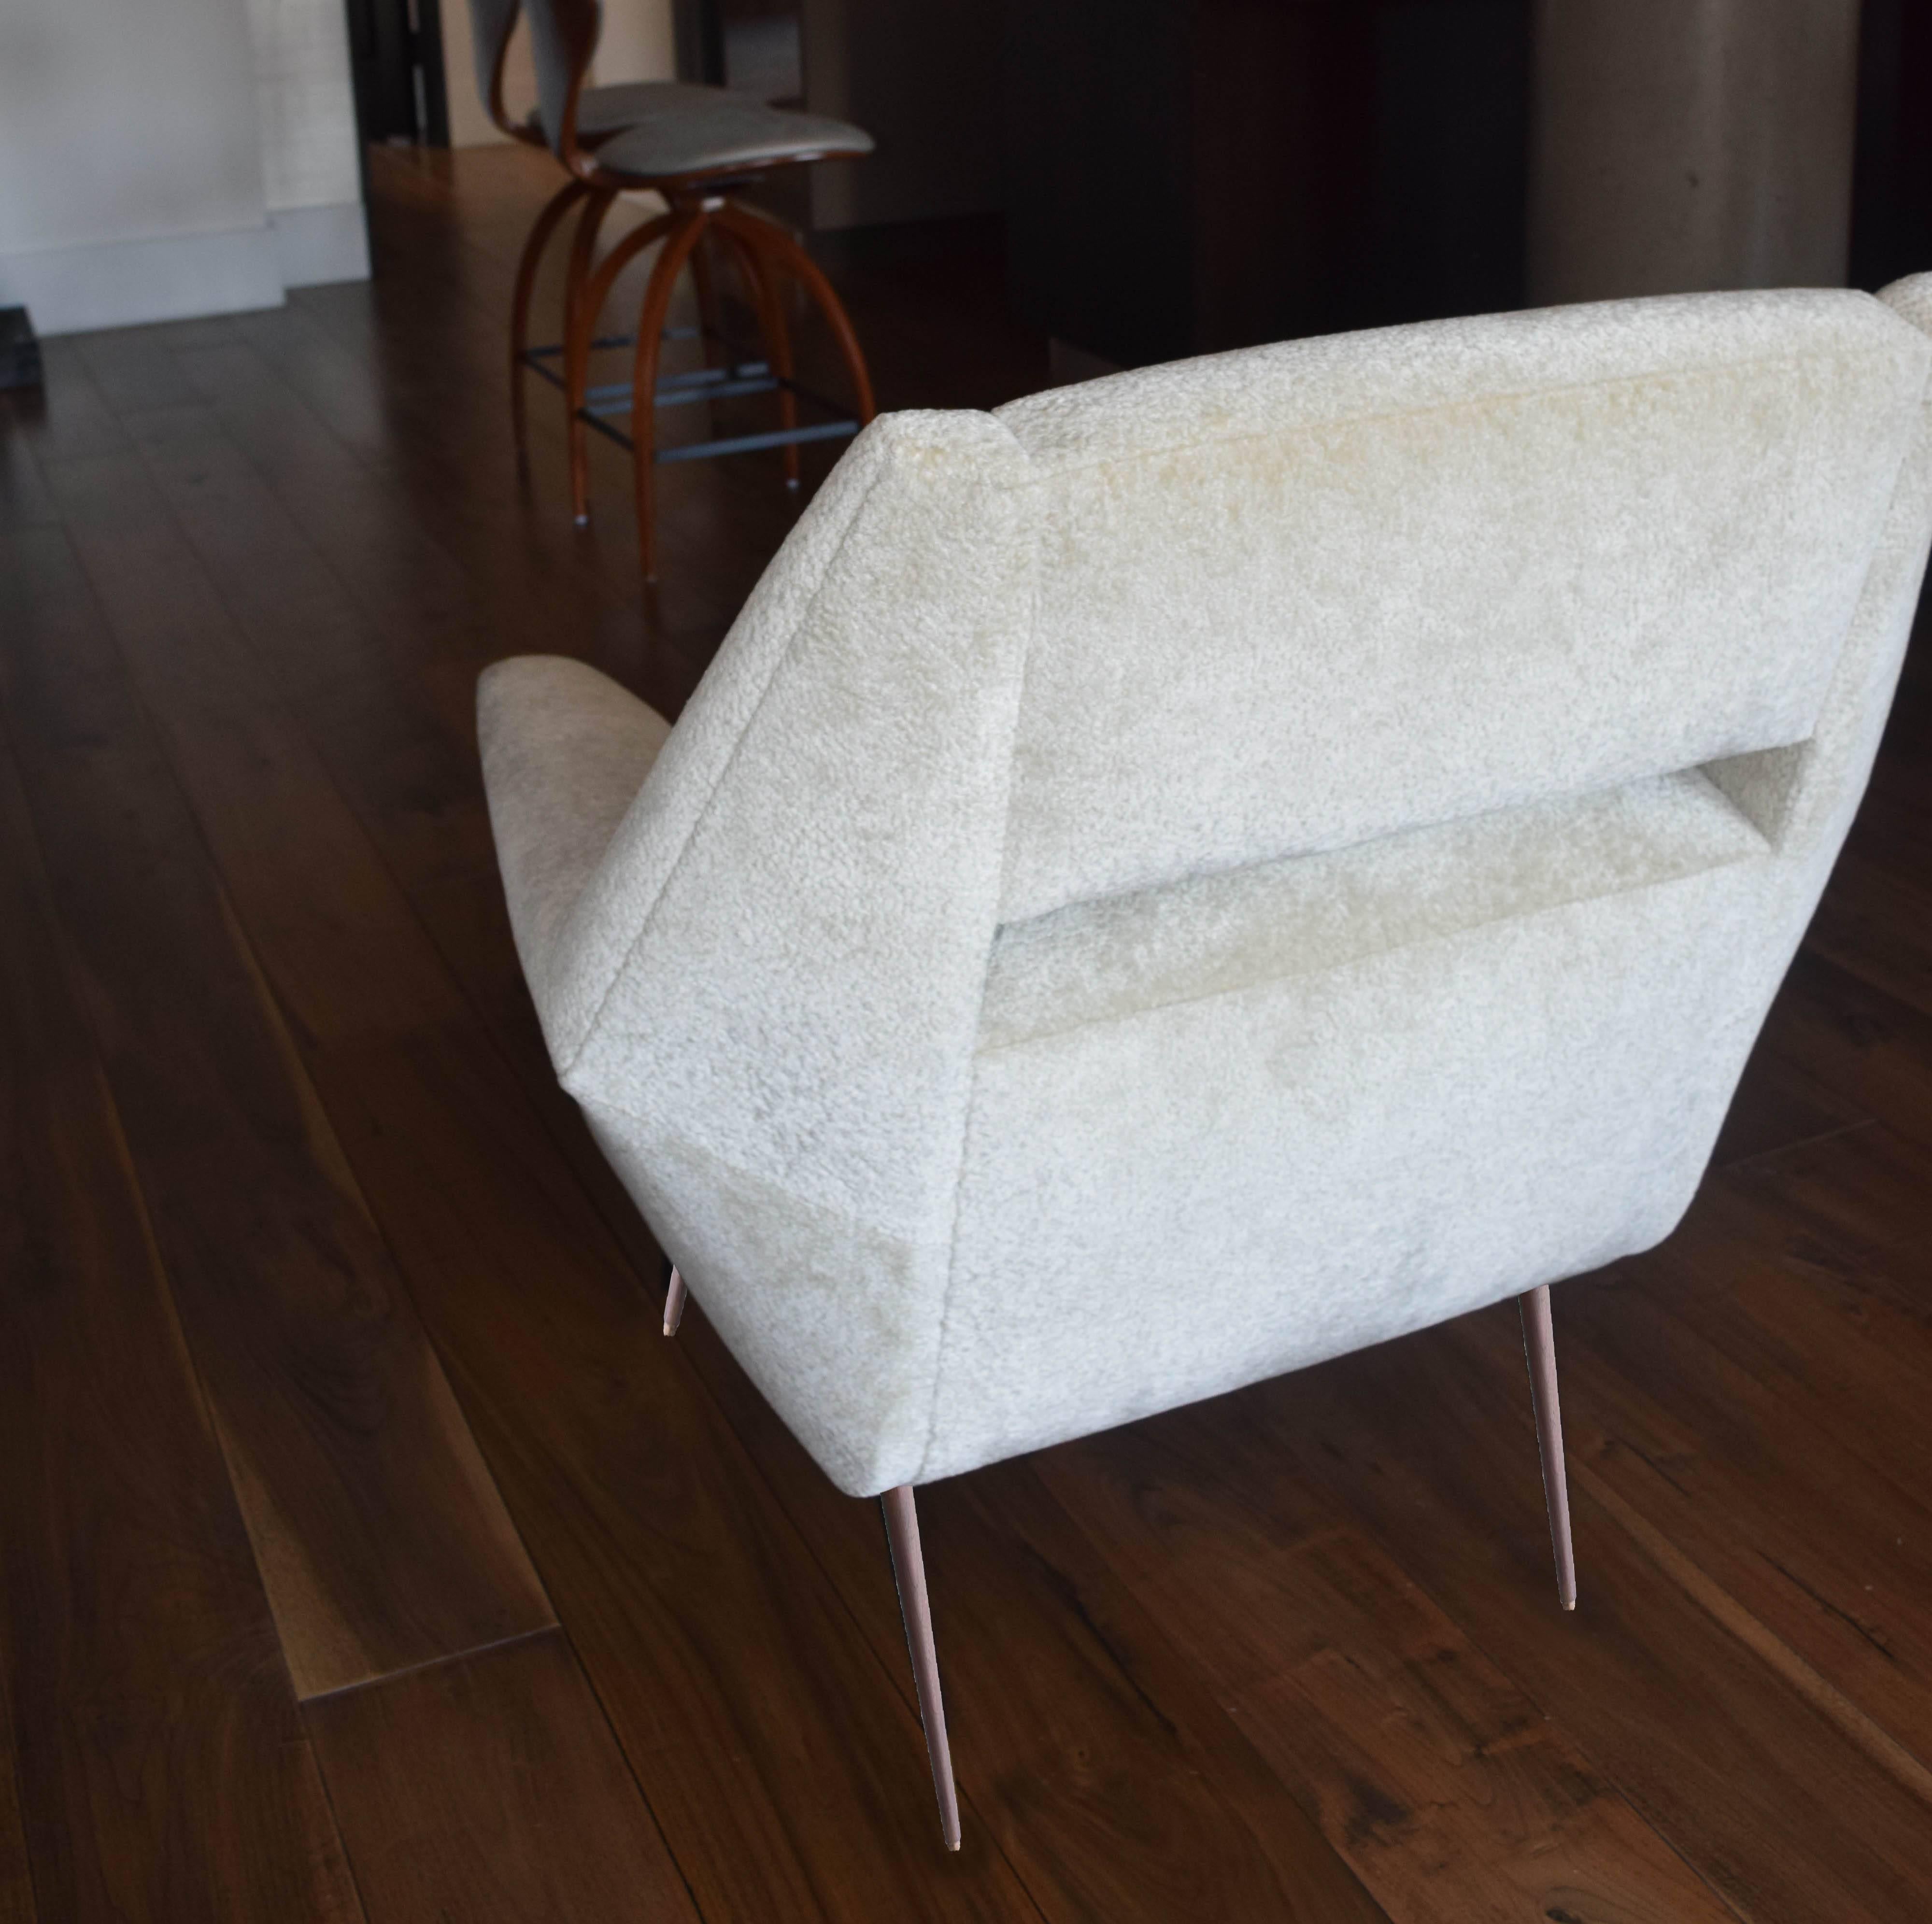 Midcentury Italian Style Sculptural Lounge Chair with Flared Arms In New Condition For Sale In New York, NY